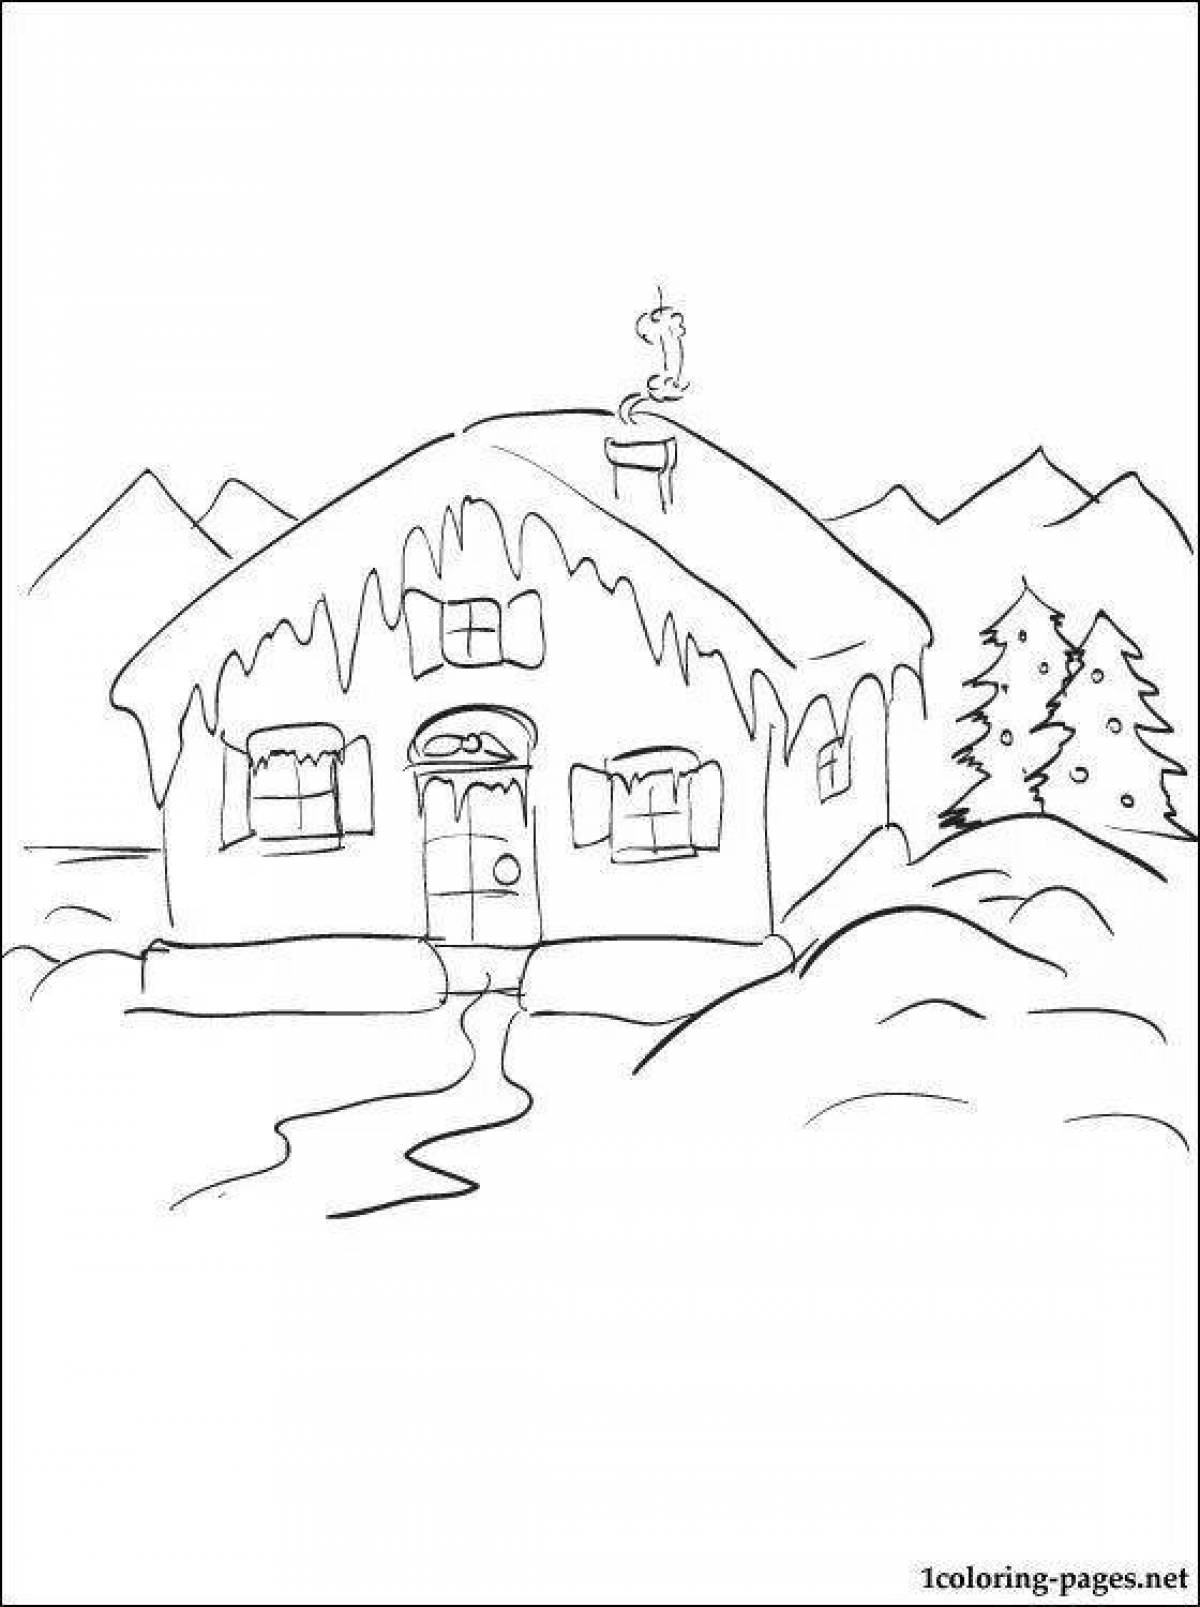 Delightful drawing of a winter landscape for children